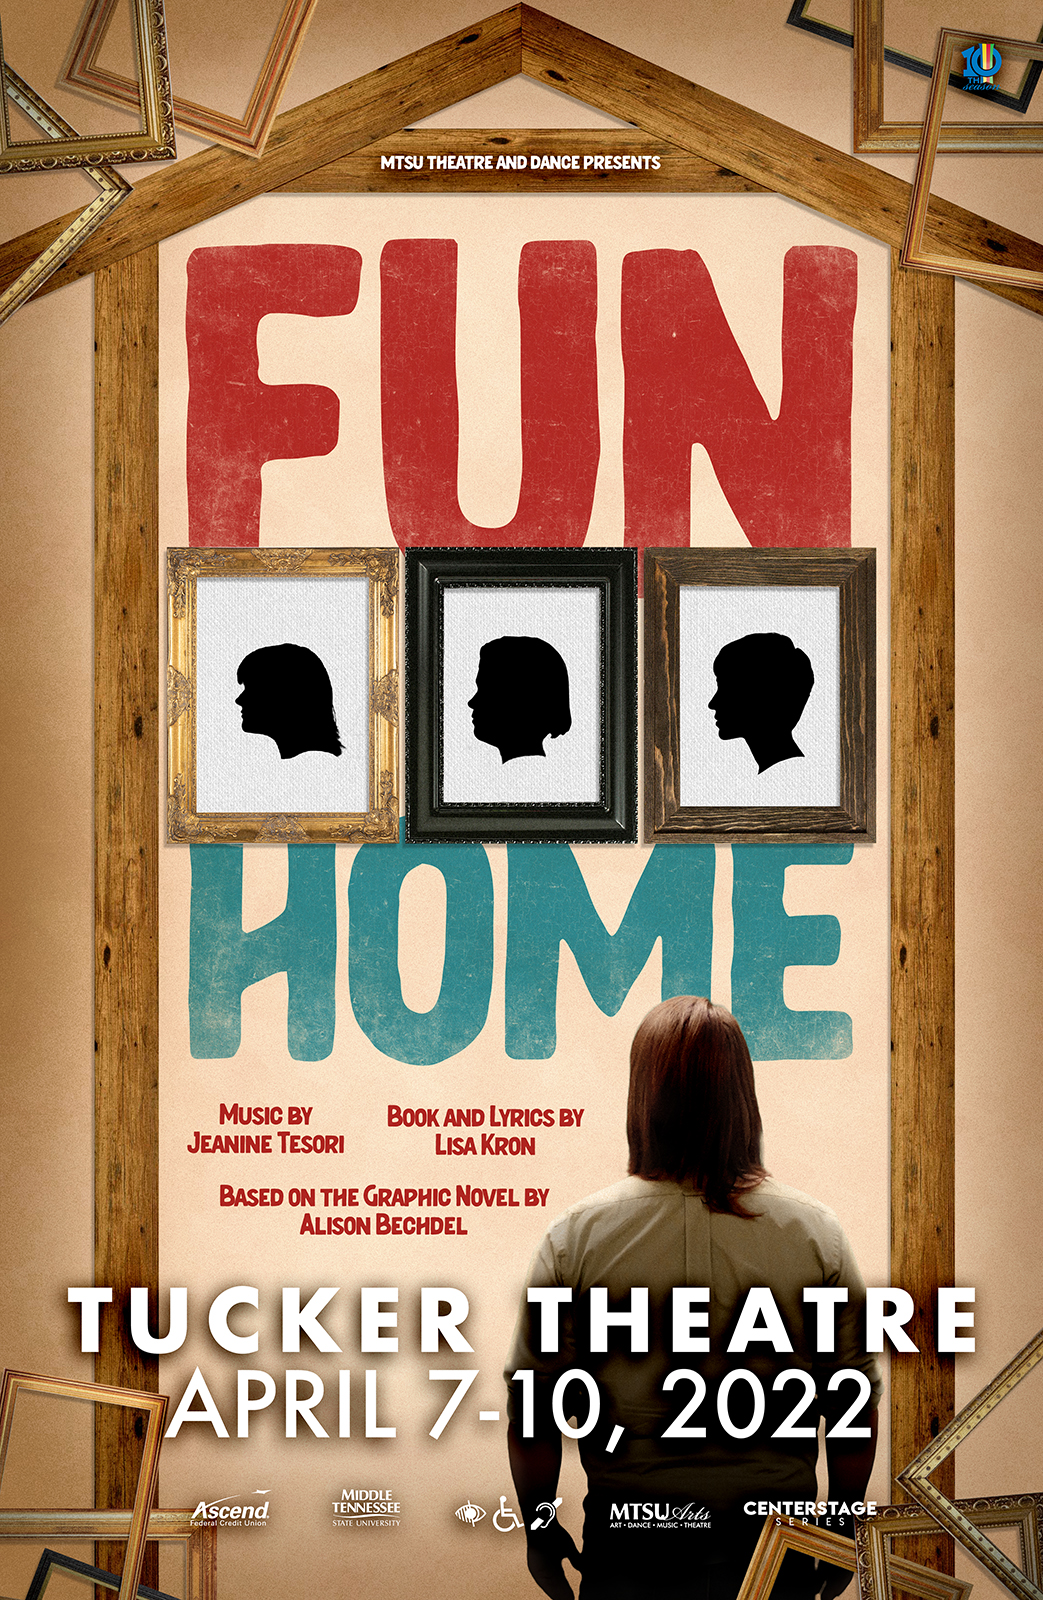 poster for MTSU Theatre production of the Tony Award-winning musical "Fun Home" April 7-10, 2022